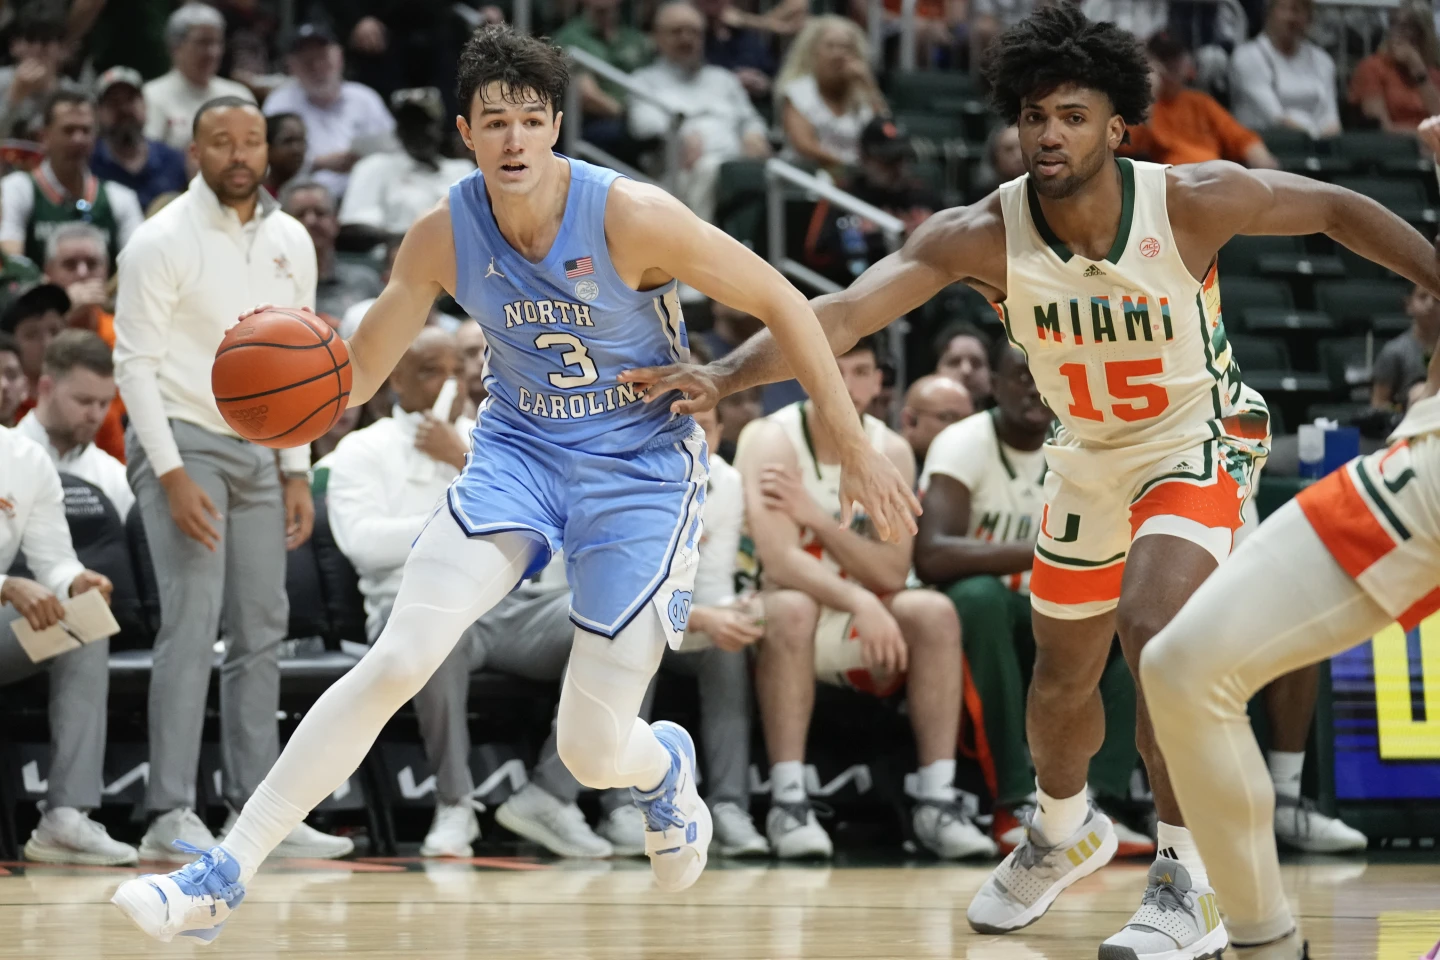 UNC men's basketball projects as solid No. 2 seed after 6th Quad 1 victory